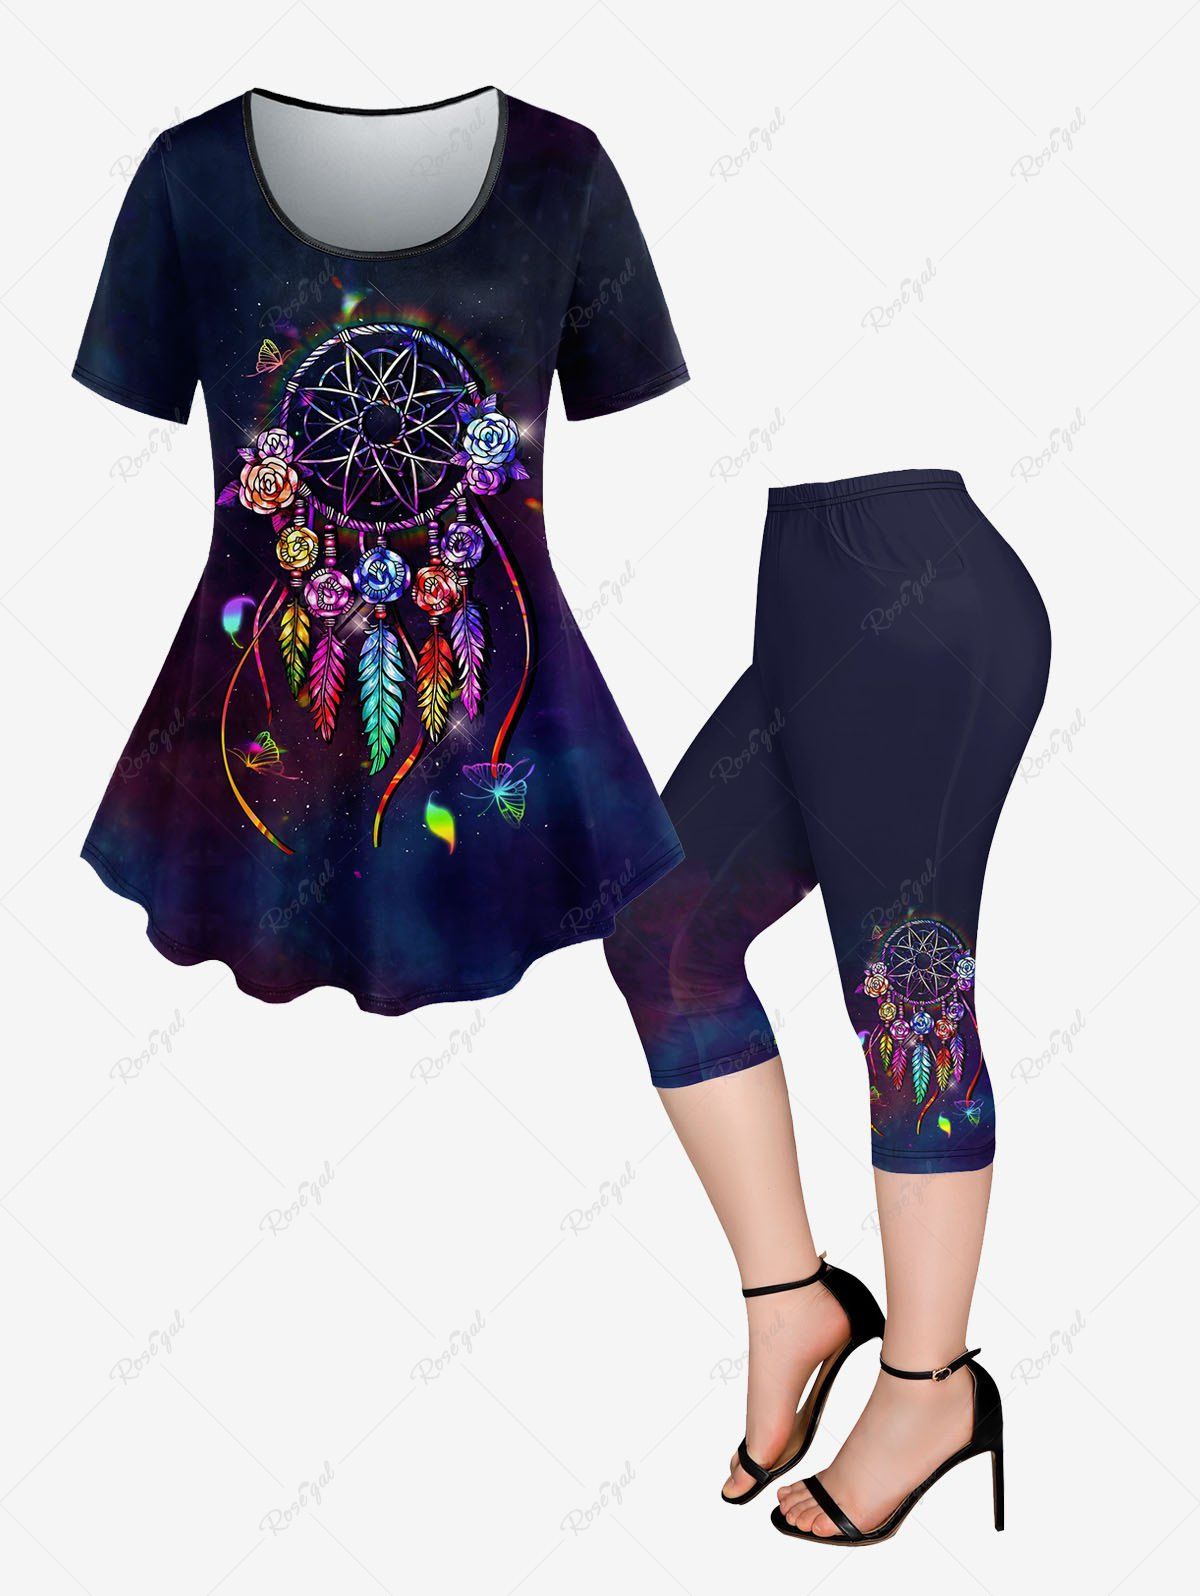 Sale Galaxy Feather Butterfly Flower Dreamcatcher Printed T-shirt and Pockets Capri Leggings Plus Size Matching Set  